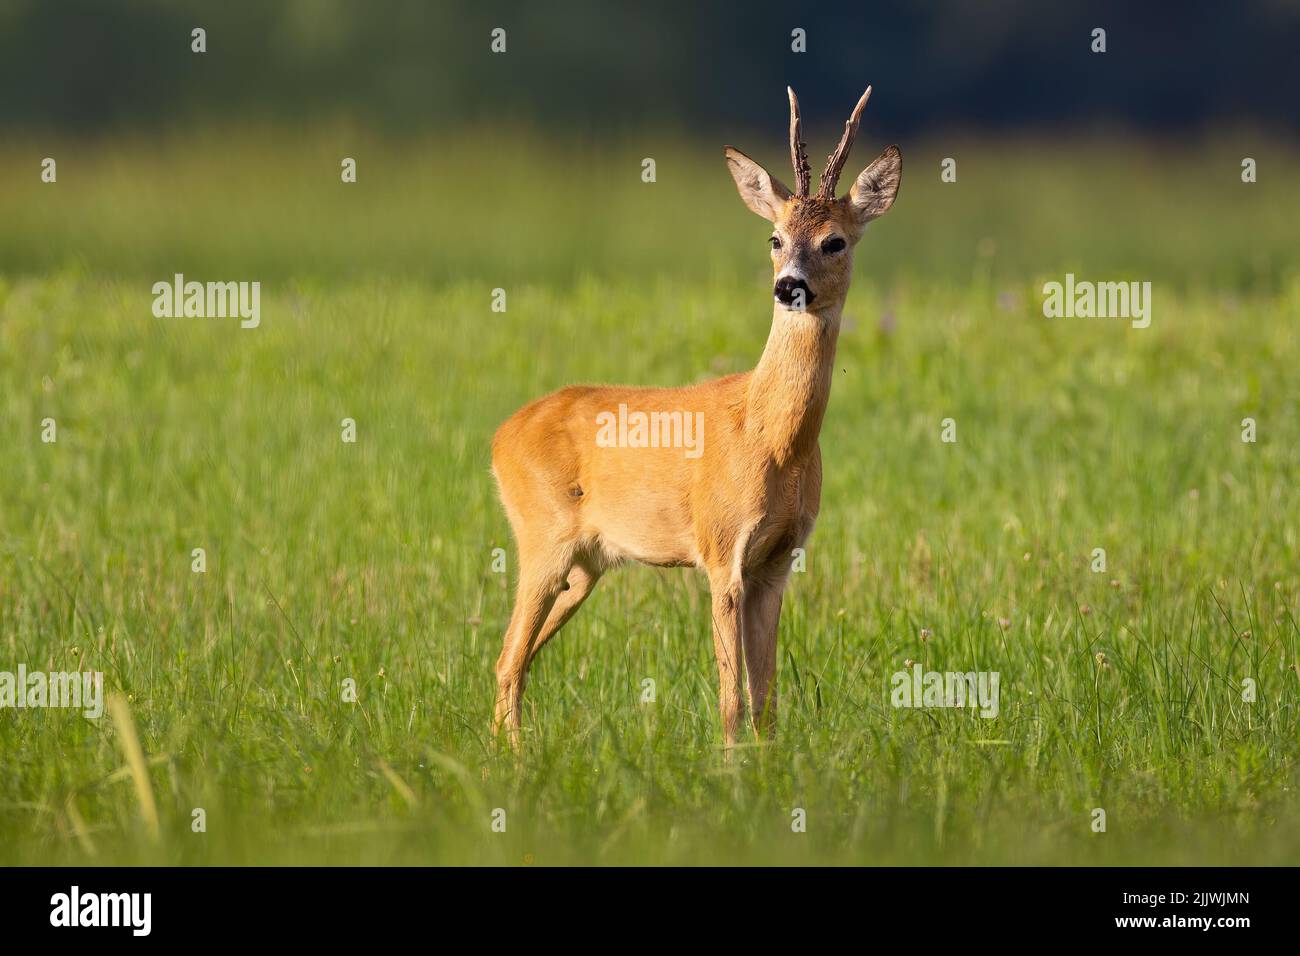 Roe deer looking on grassland in summertime nature Stock Photo